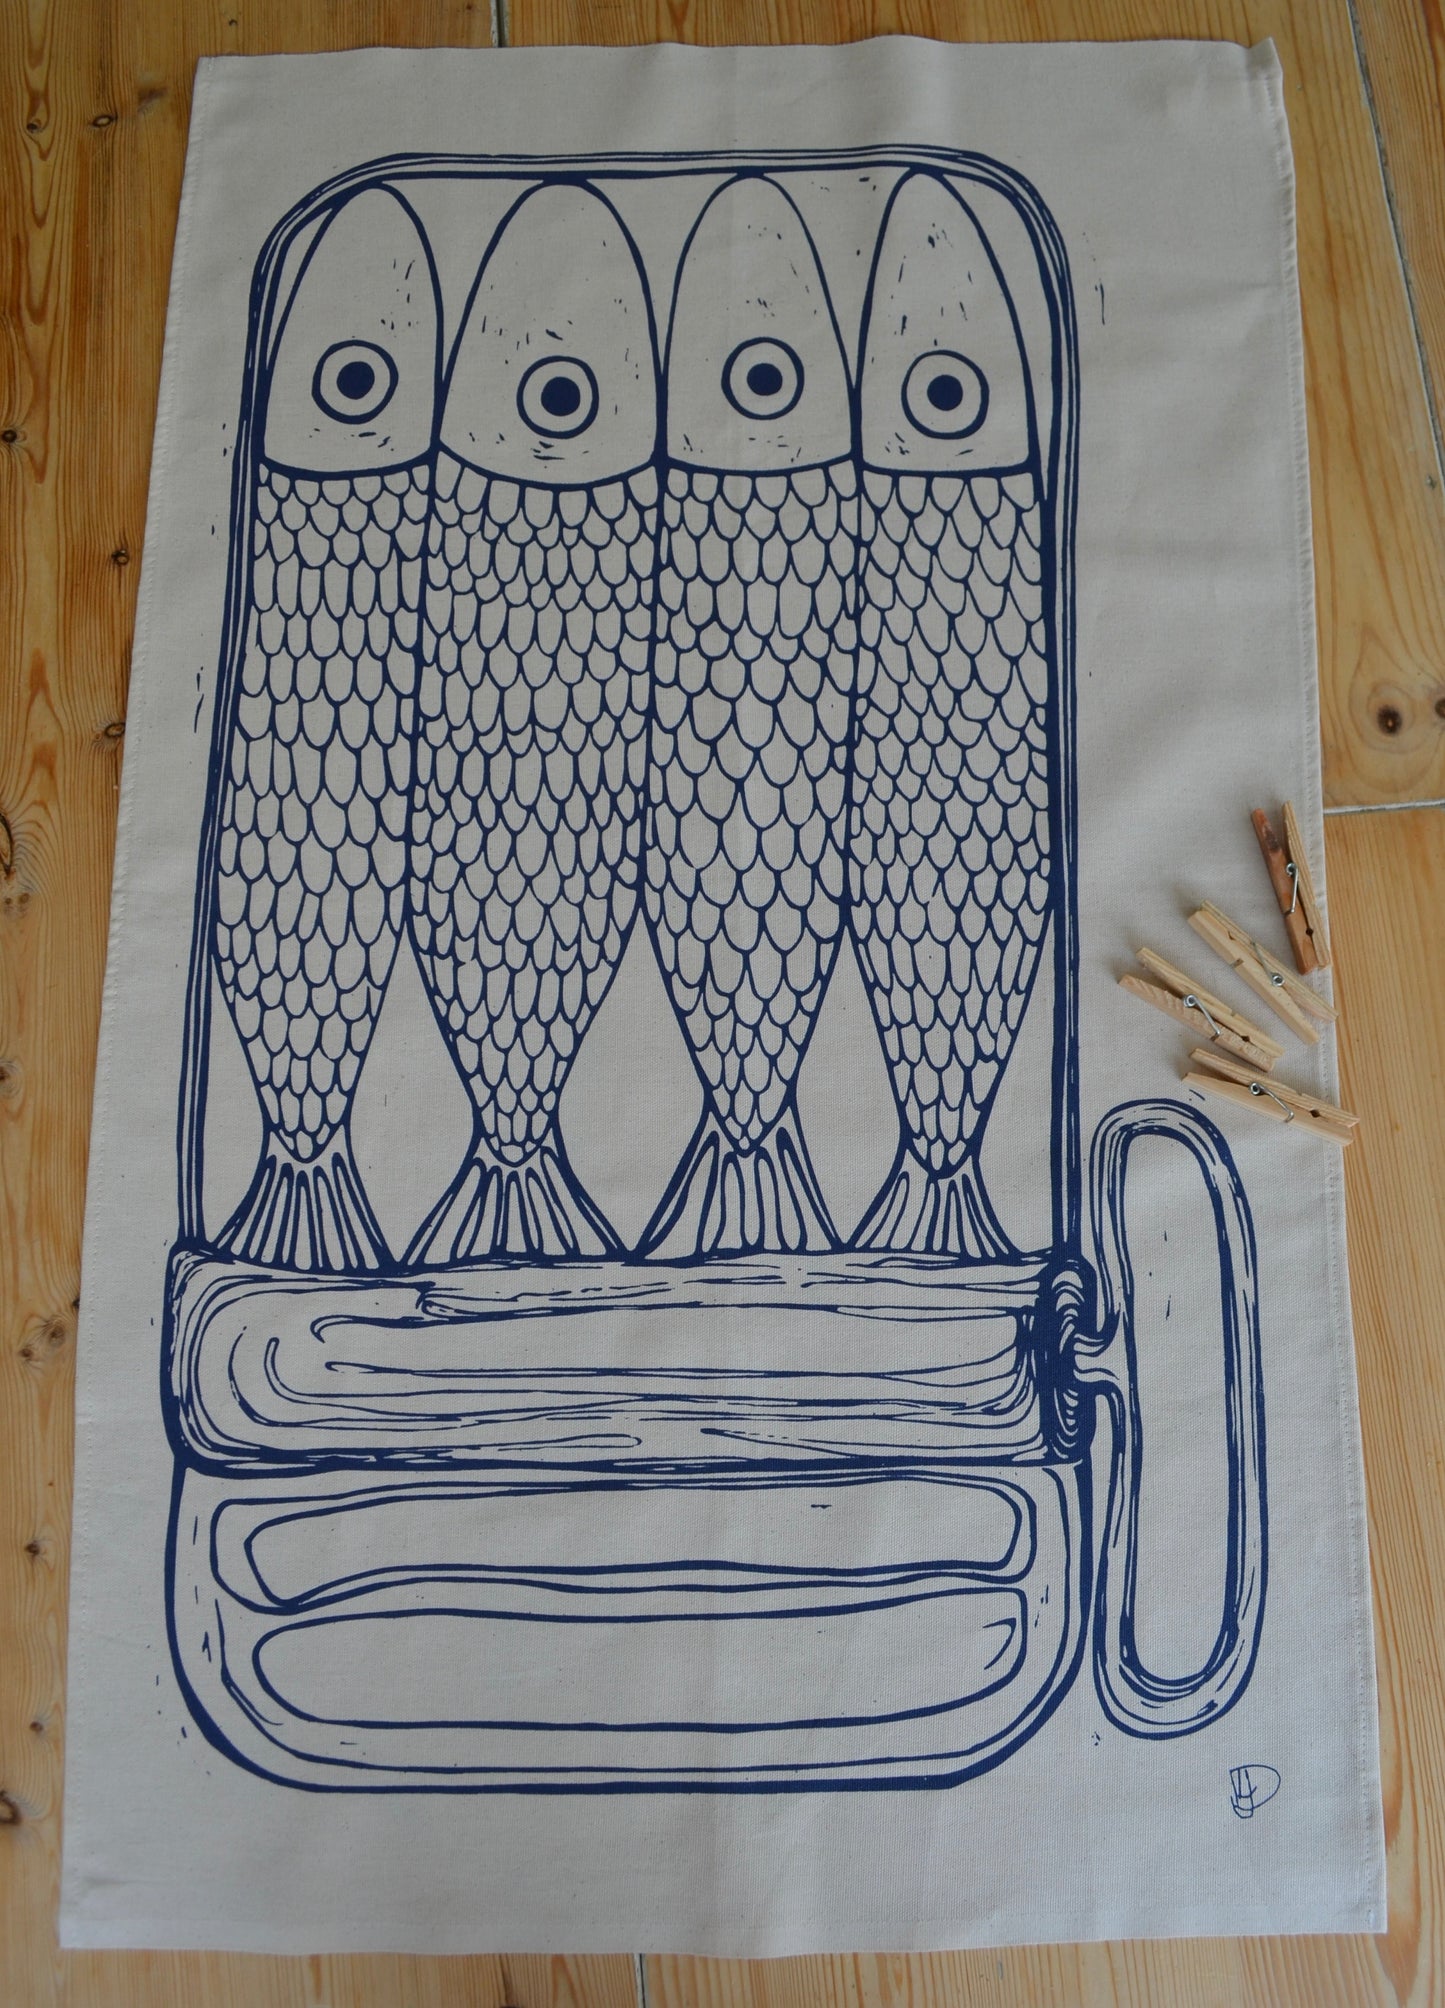 Full image of "Sardines in a tin" tea towel on the kitchen table with pegs to show scale